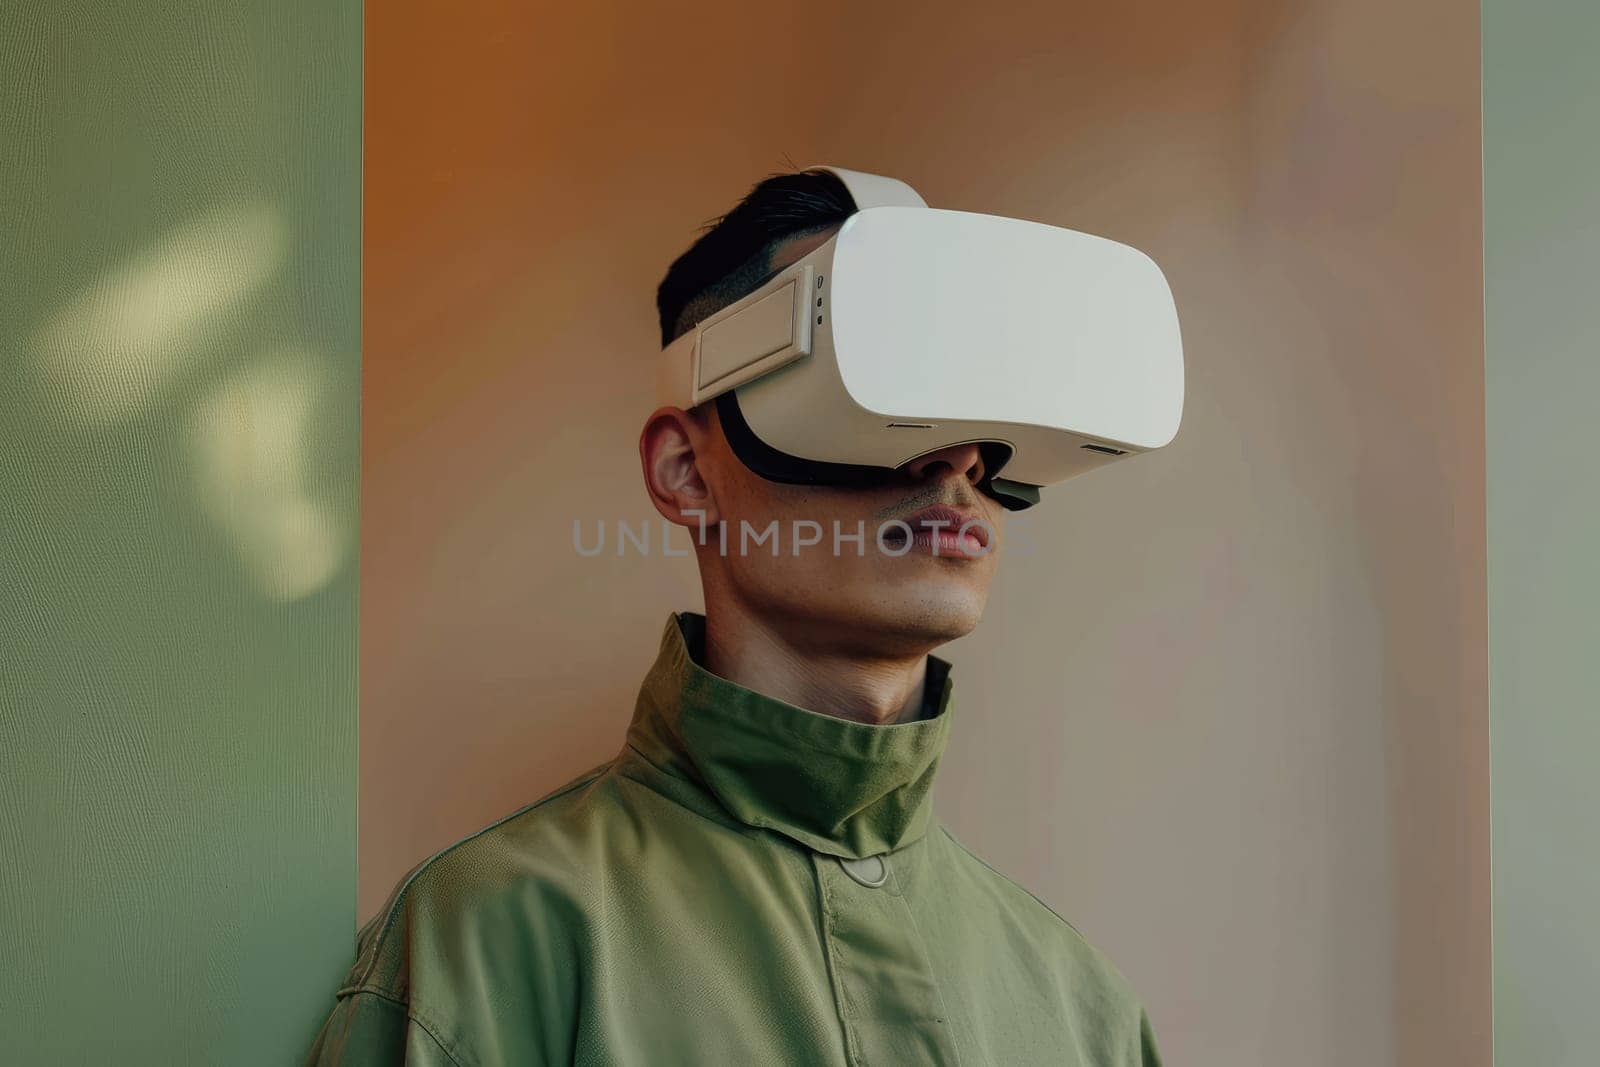 A man wearing a green jacket and a white virtual reality headset.